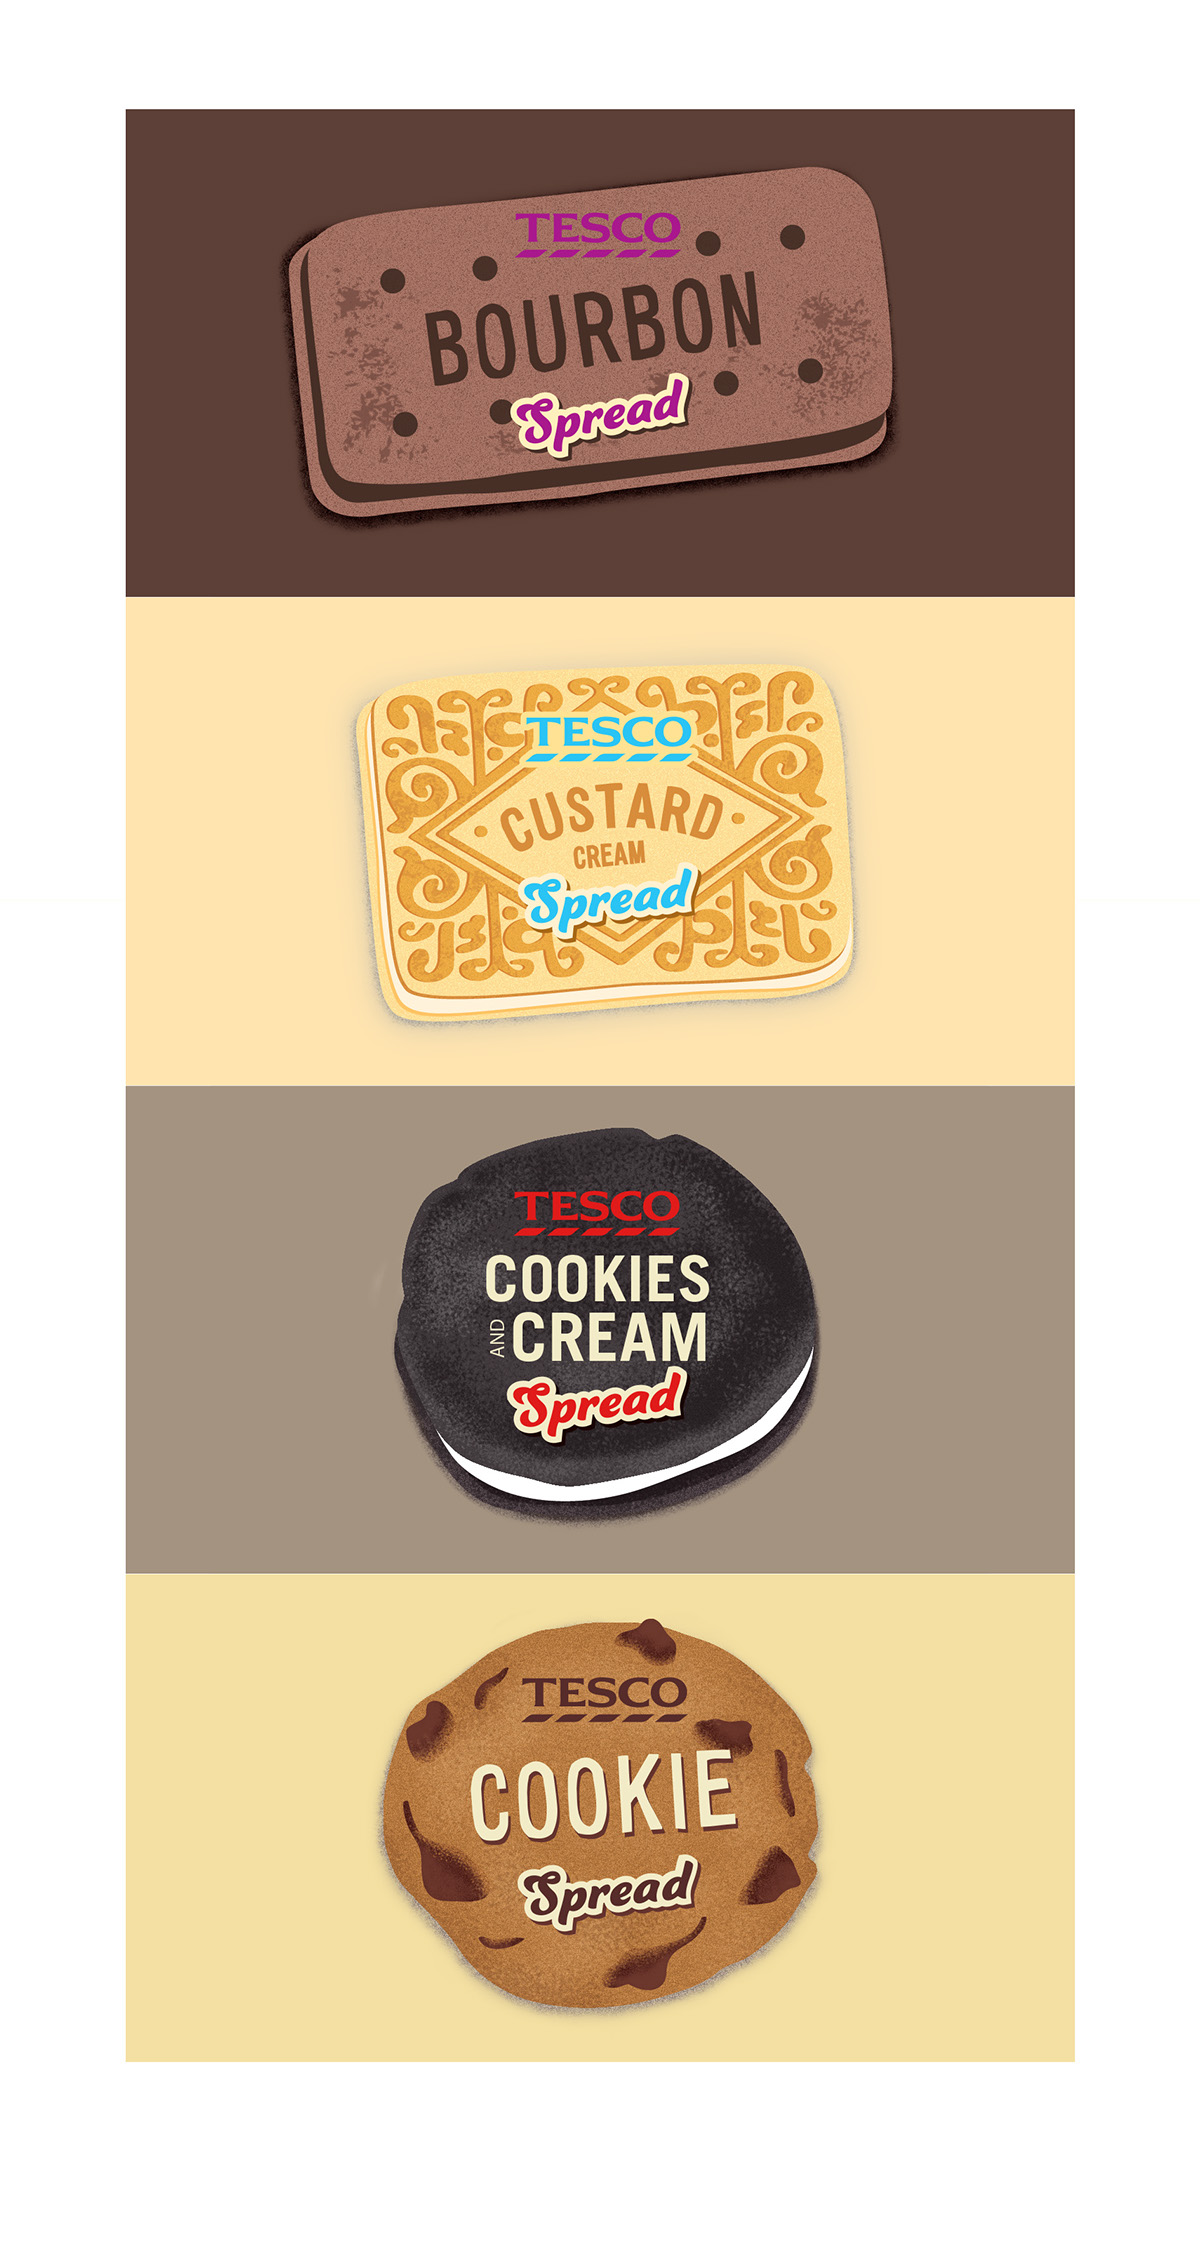 Tesco biscuit spreads